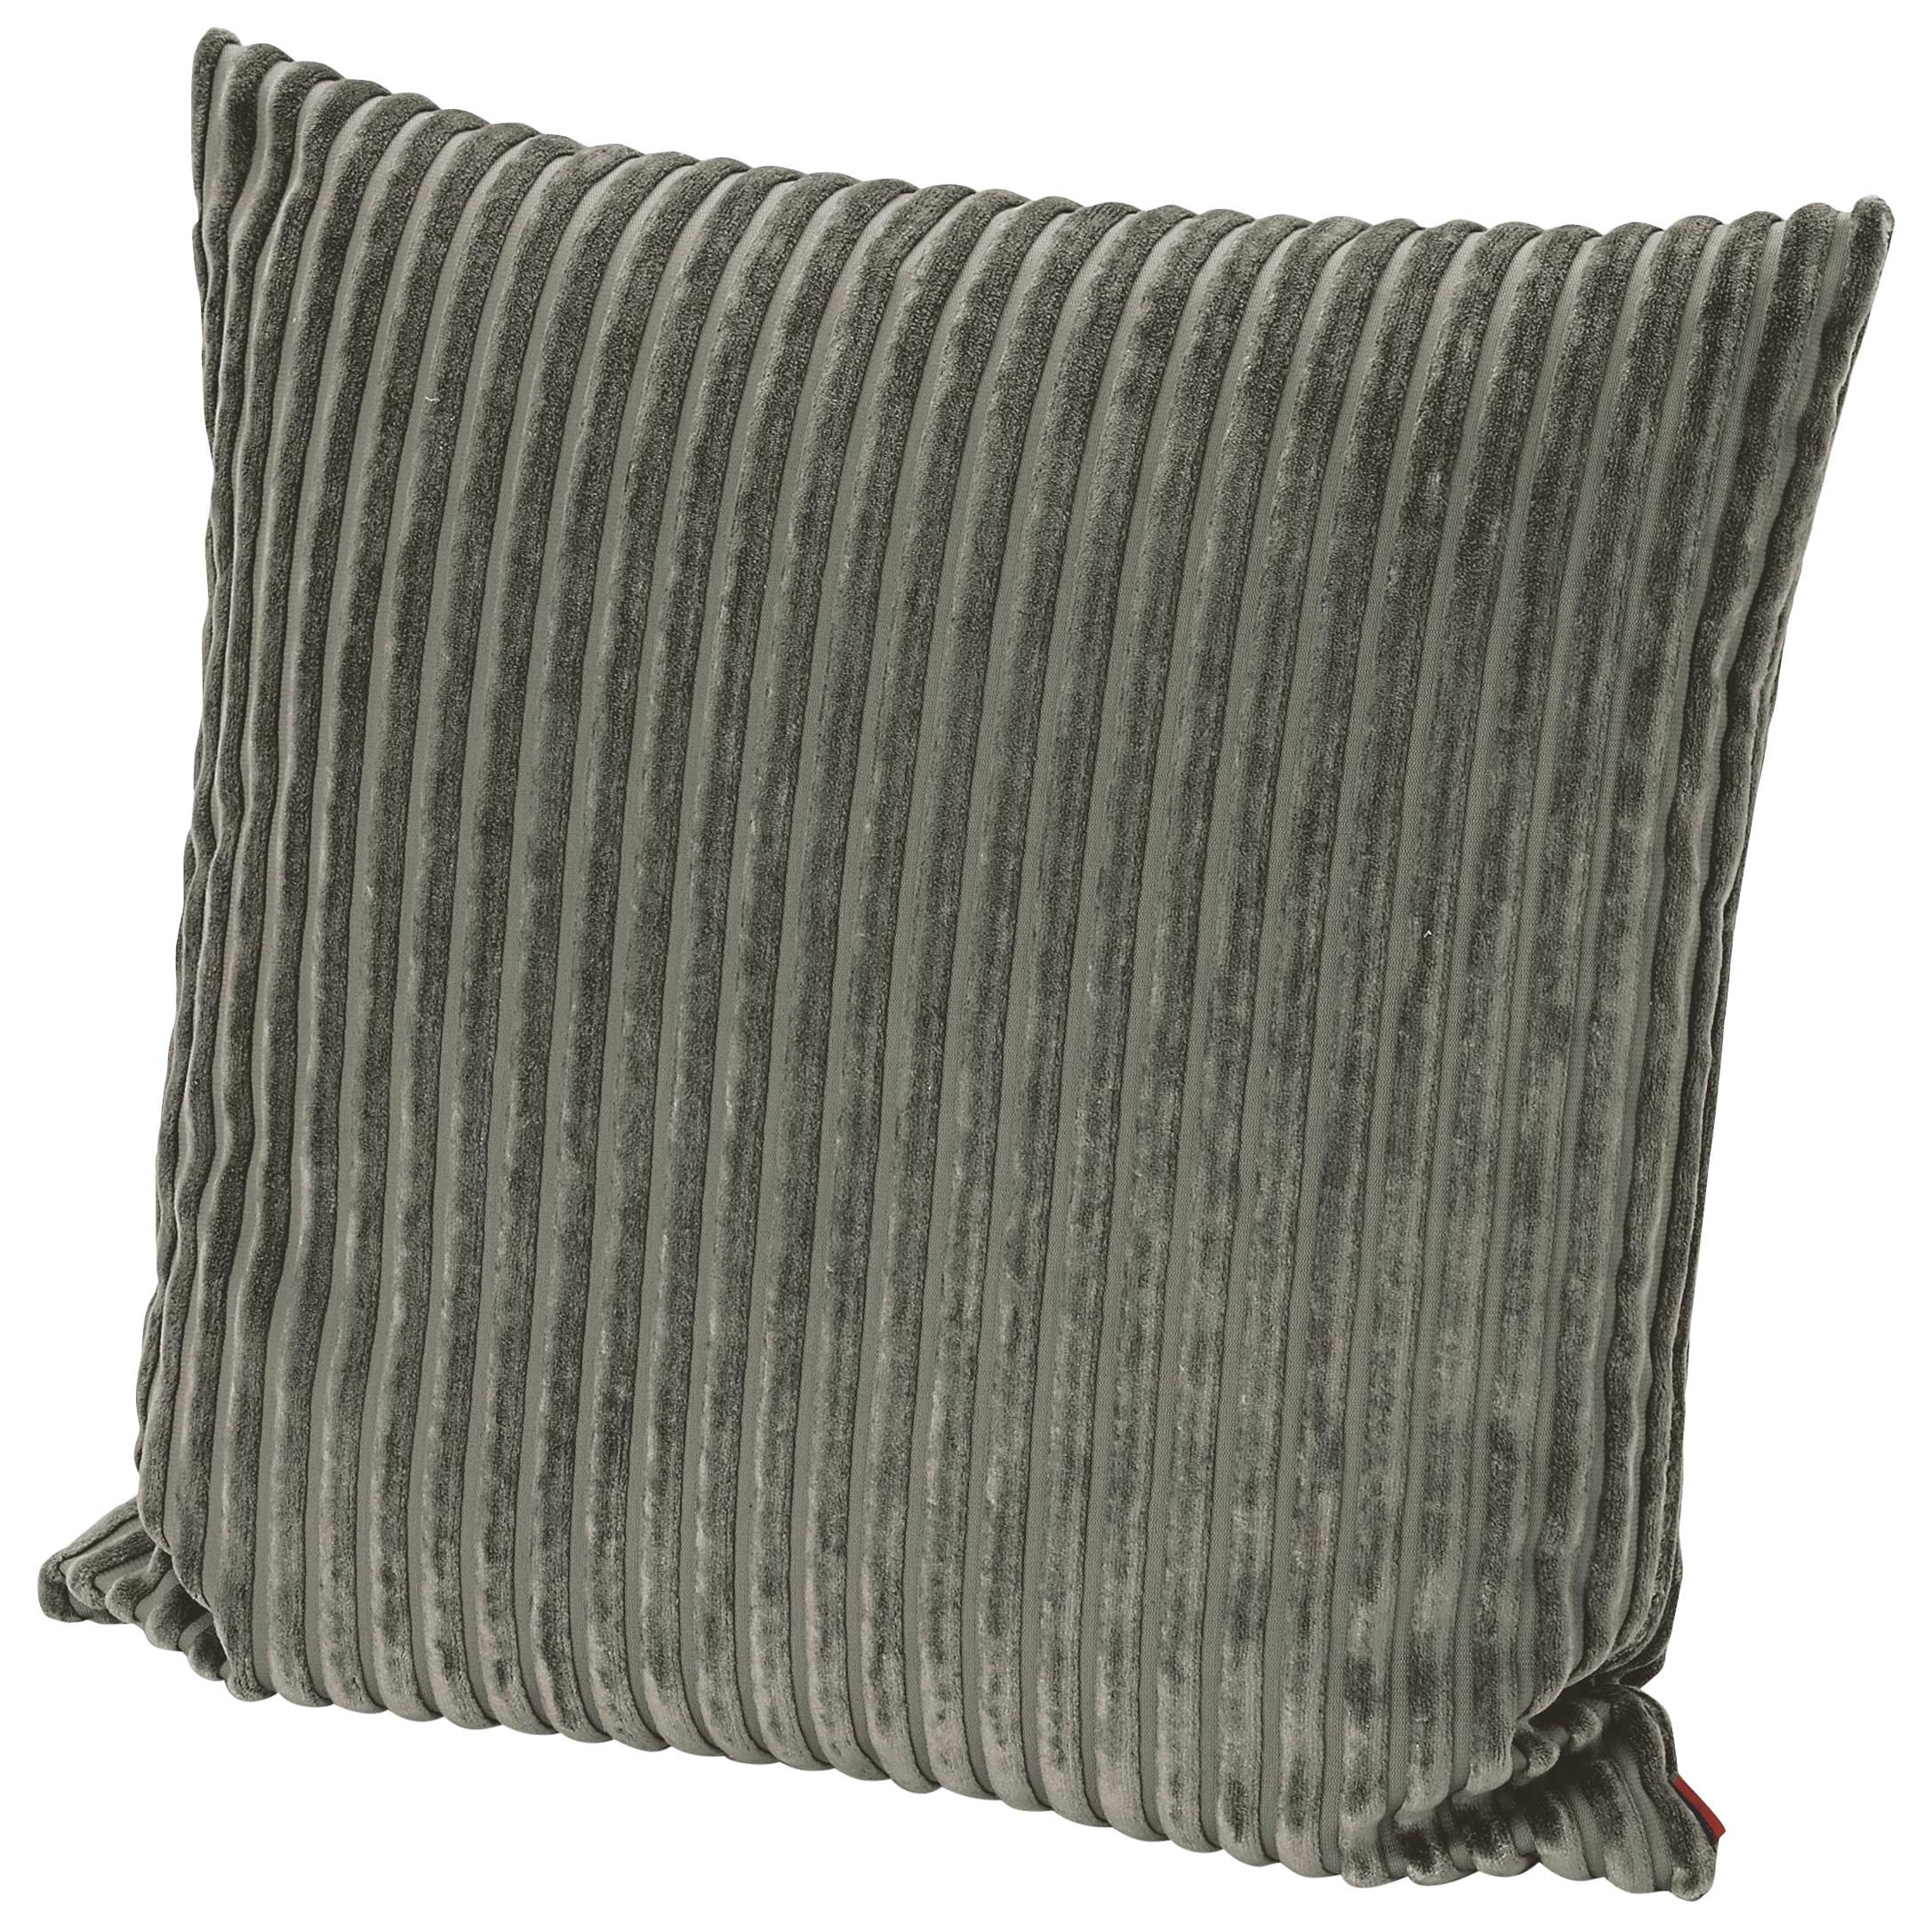 Missoni Home Rabat Cushion in Textured Green Stripes For Sale